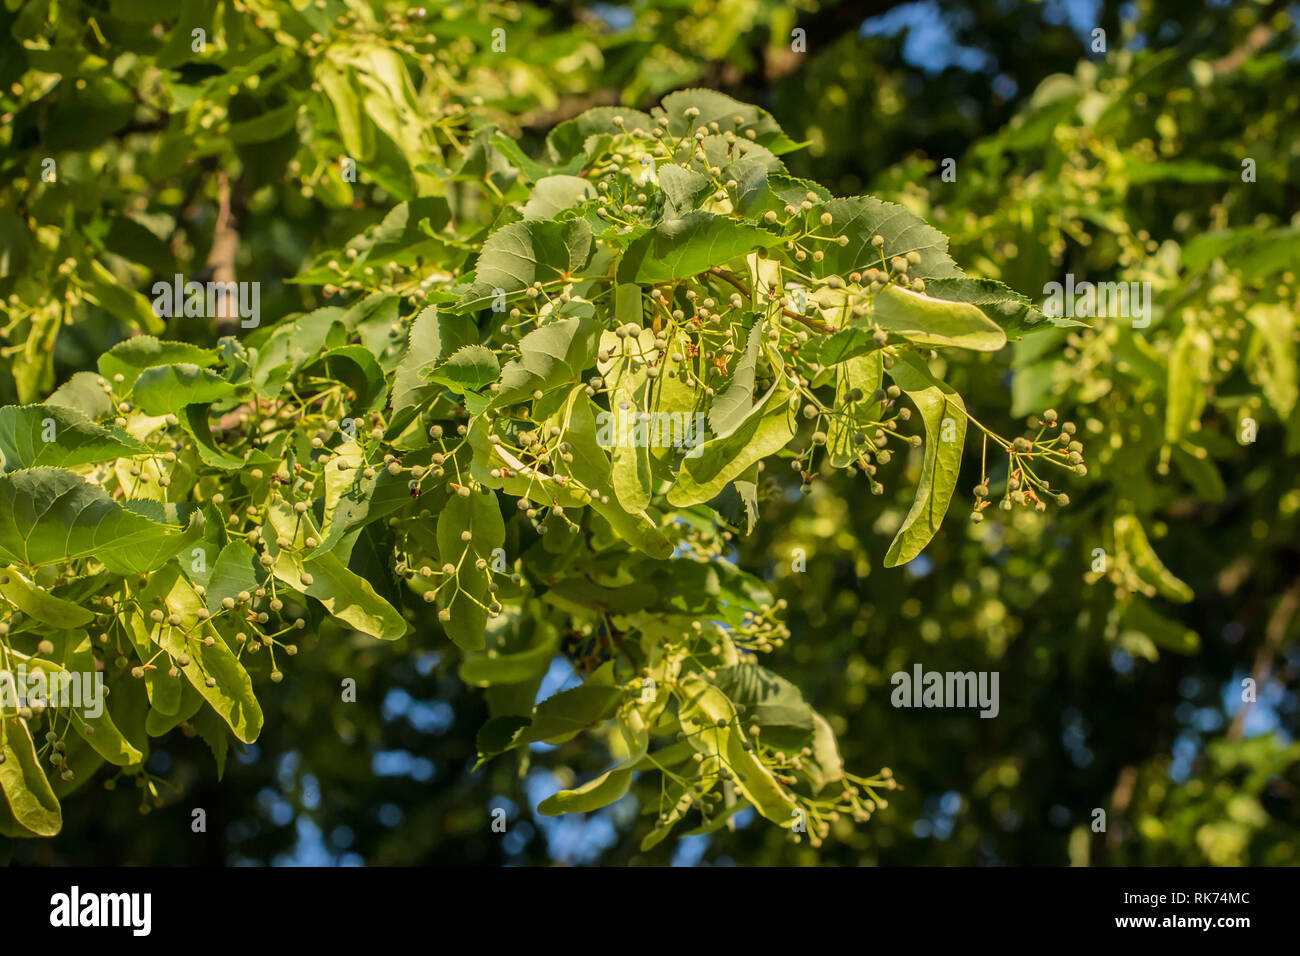 Leaves and immature fruits on the lime / Tilia tree Stock Photo